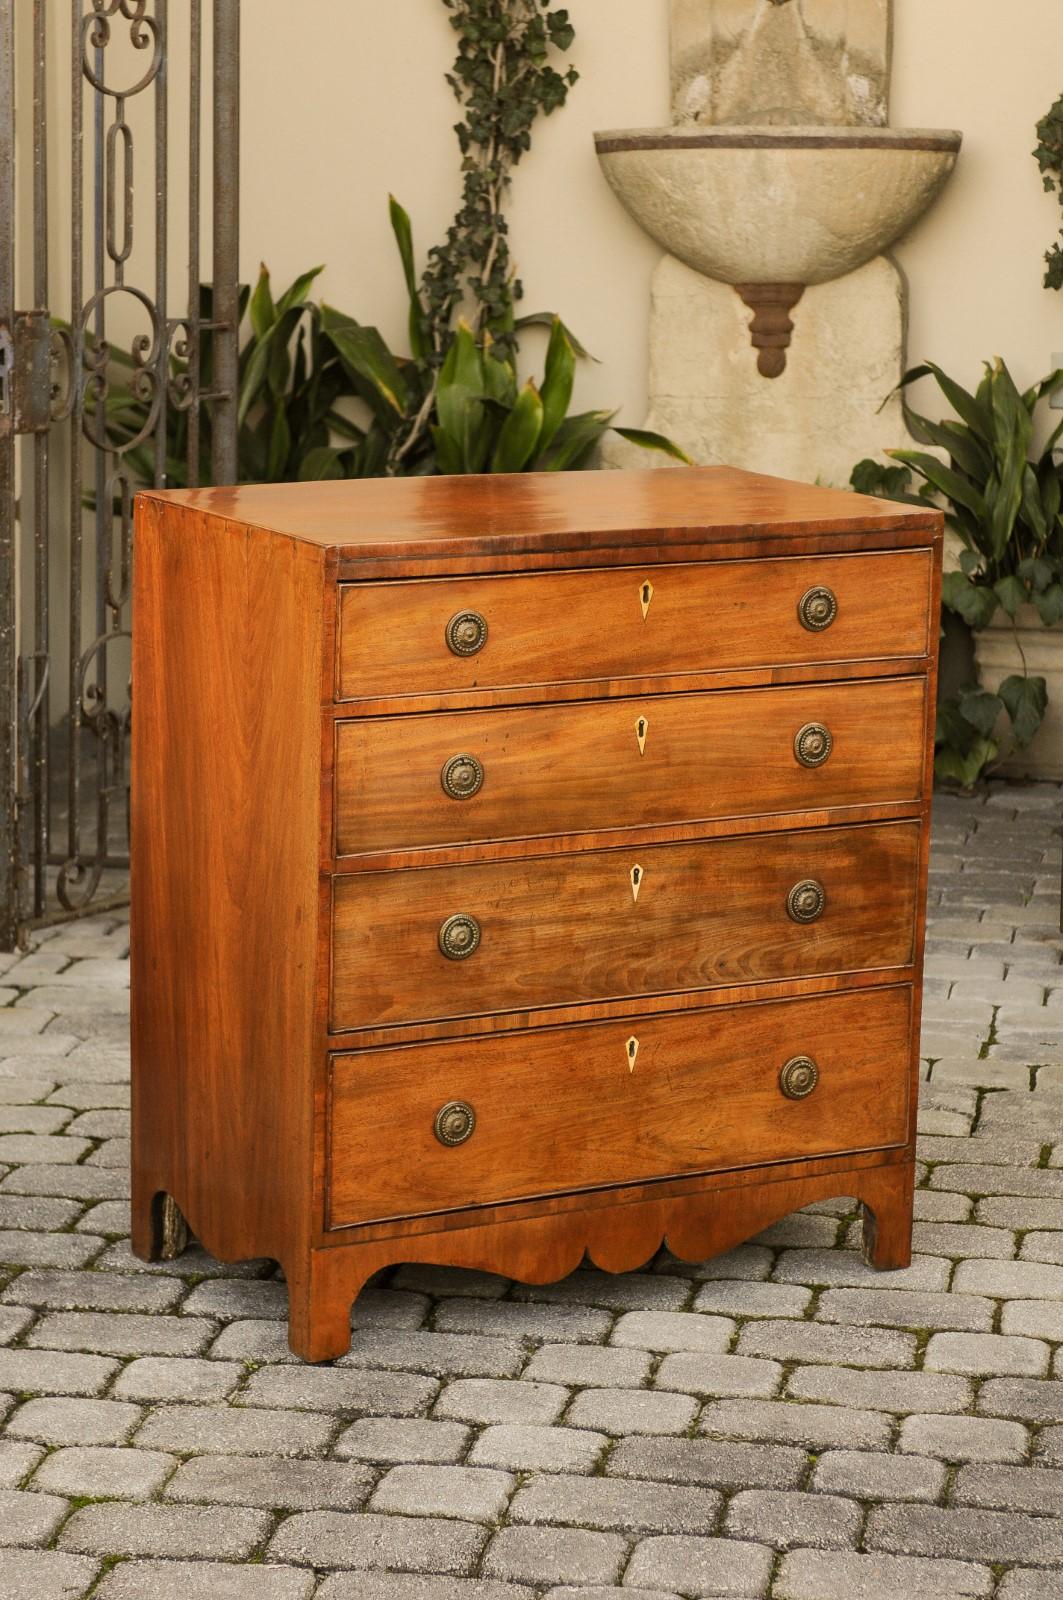 19th Century English 1860s Mahogany Commode with Graduated Drawers and Scalloped Apron